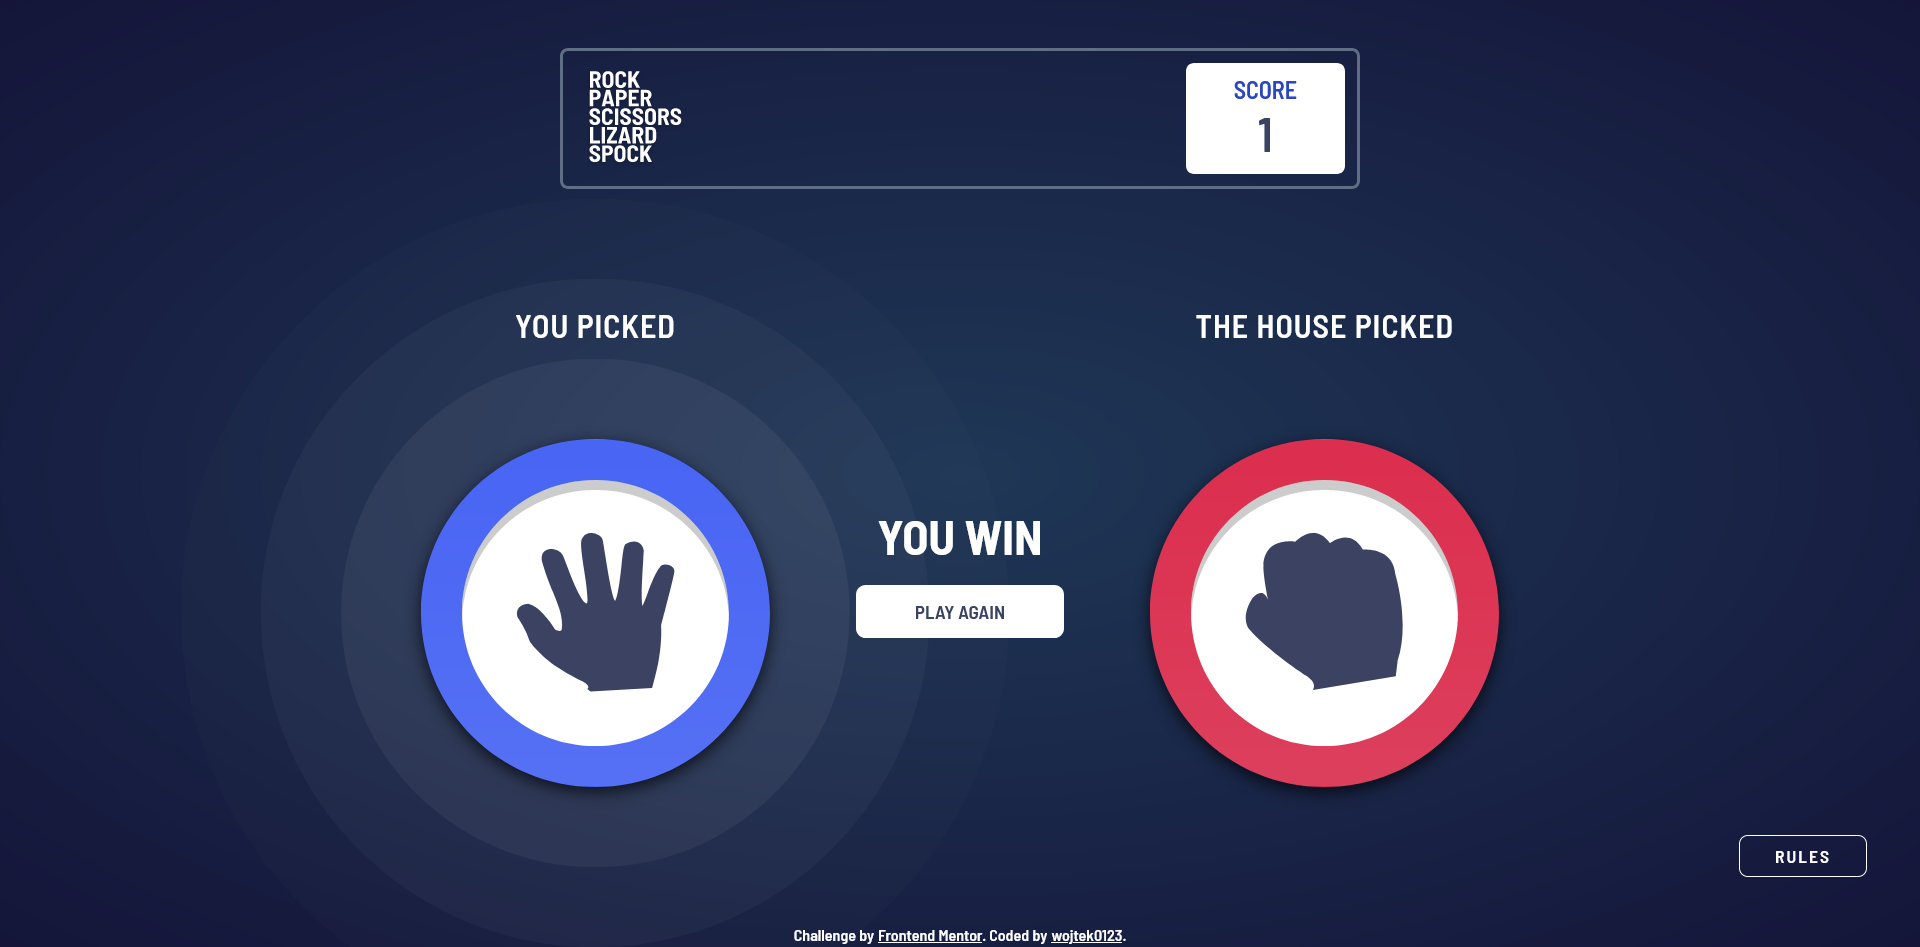 Final stage of the game where user can see who win